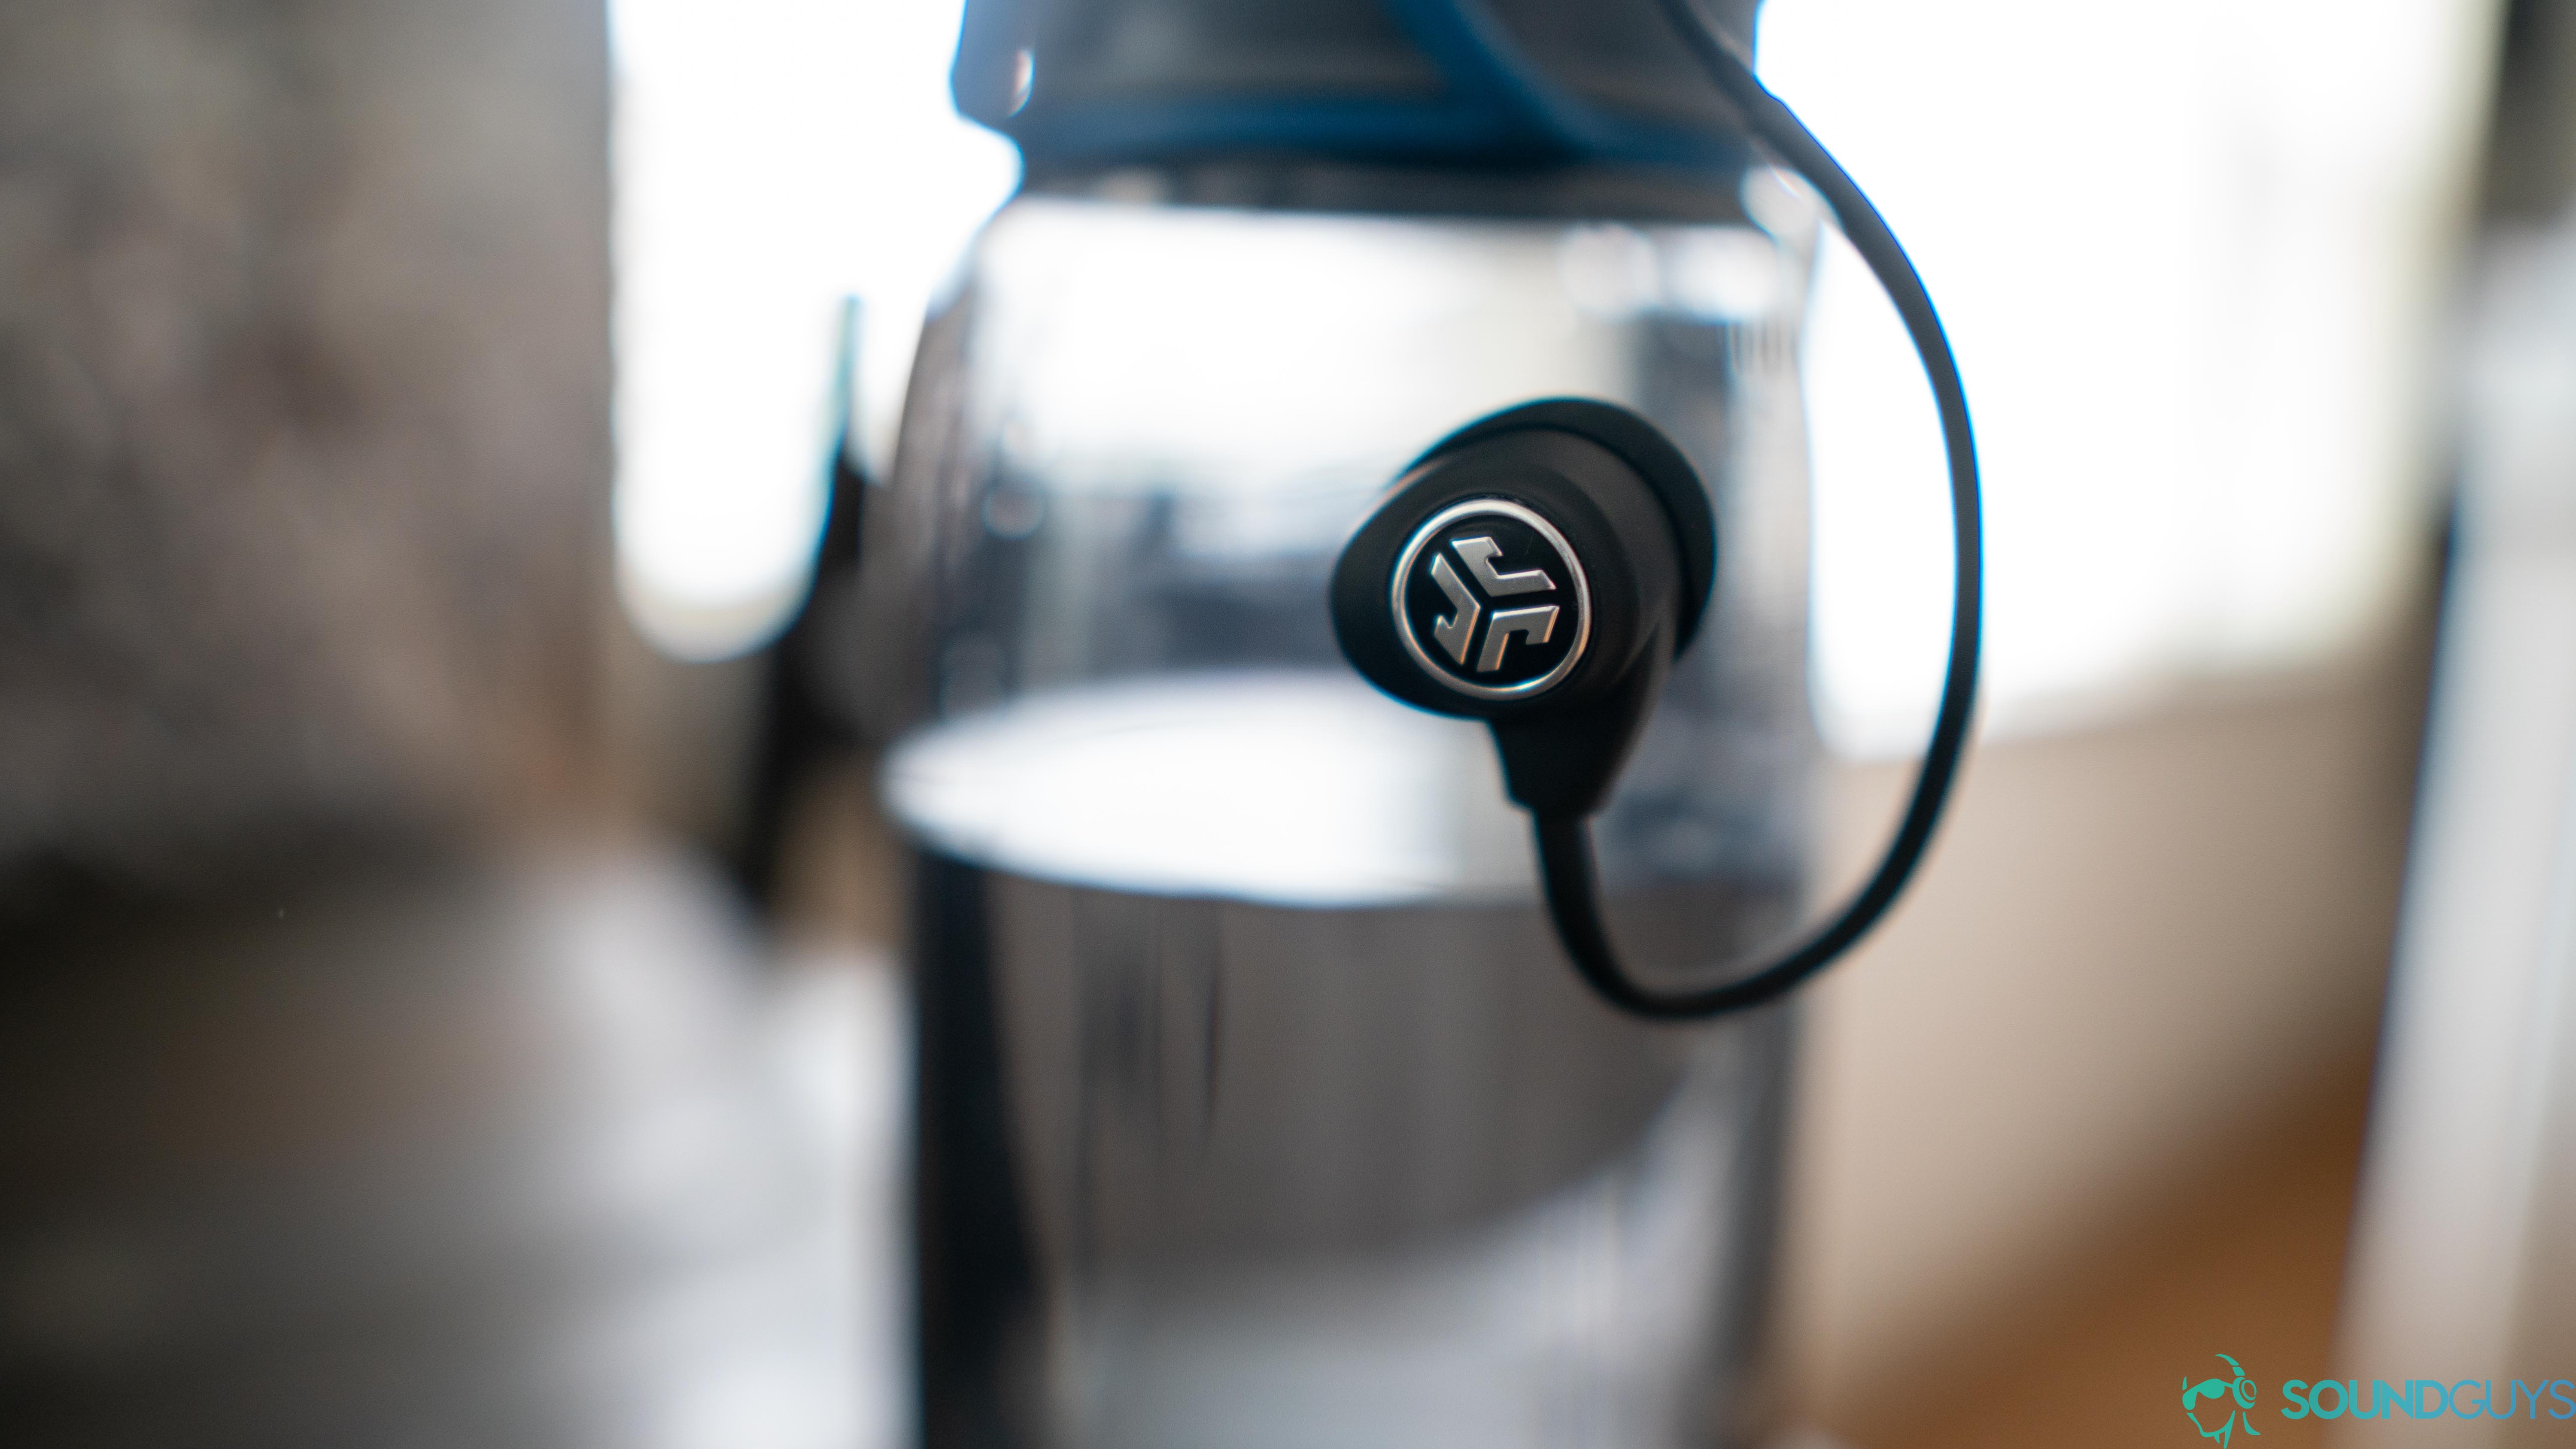 The headphones hanging off a water bottle.